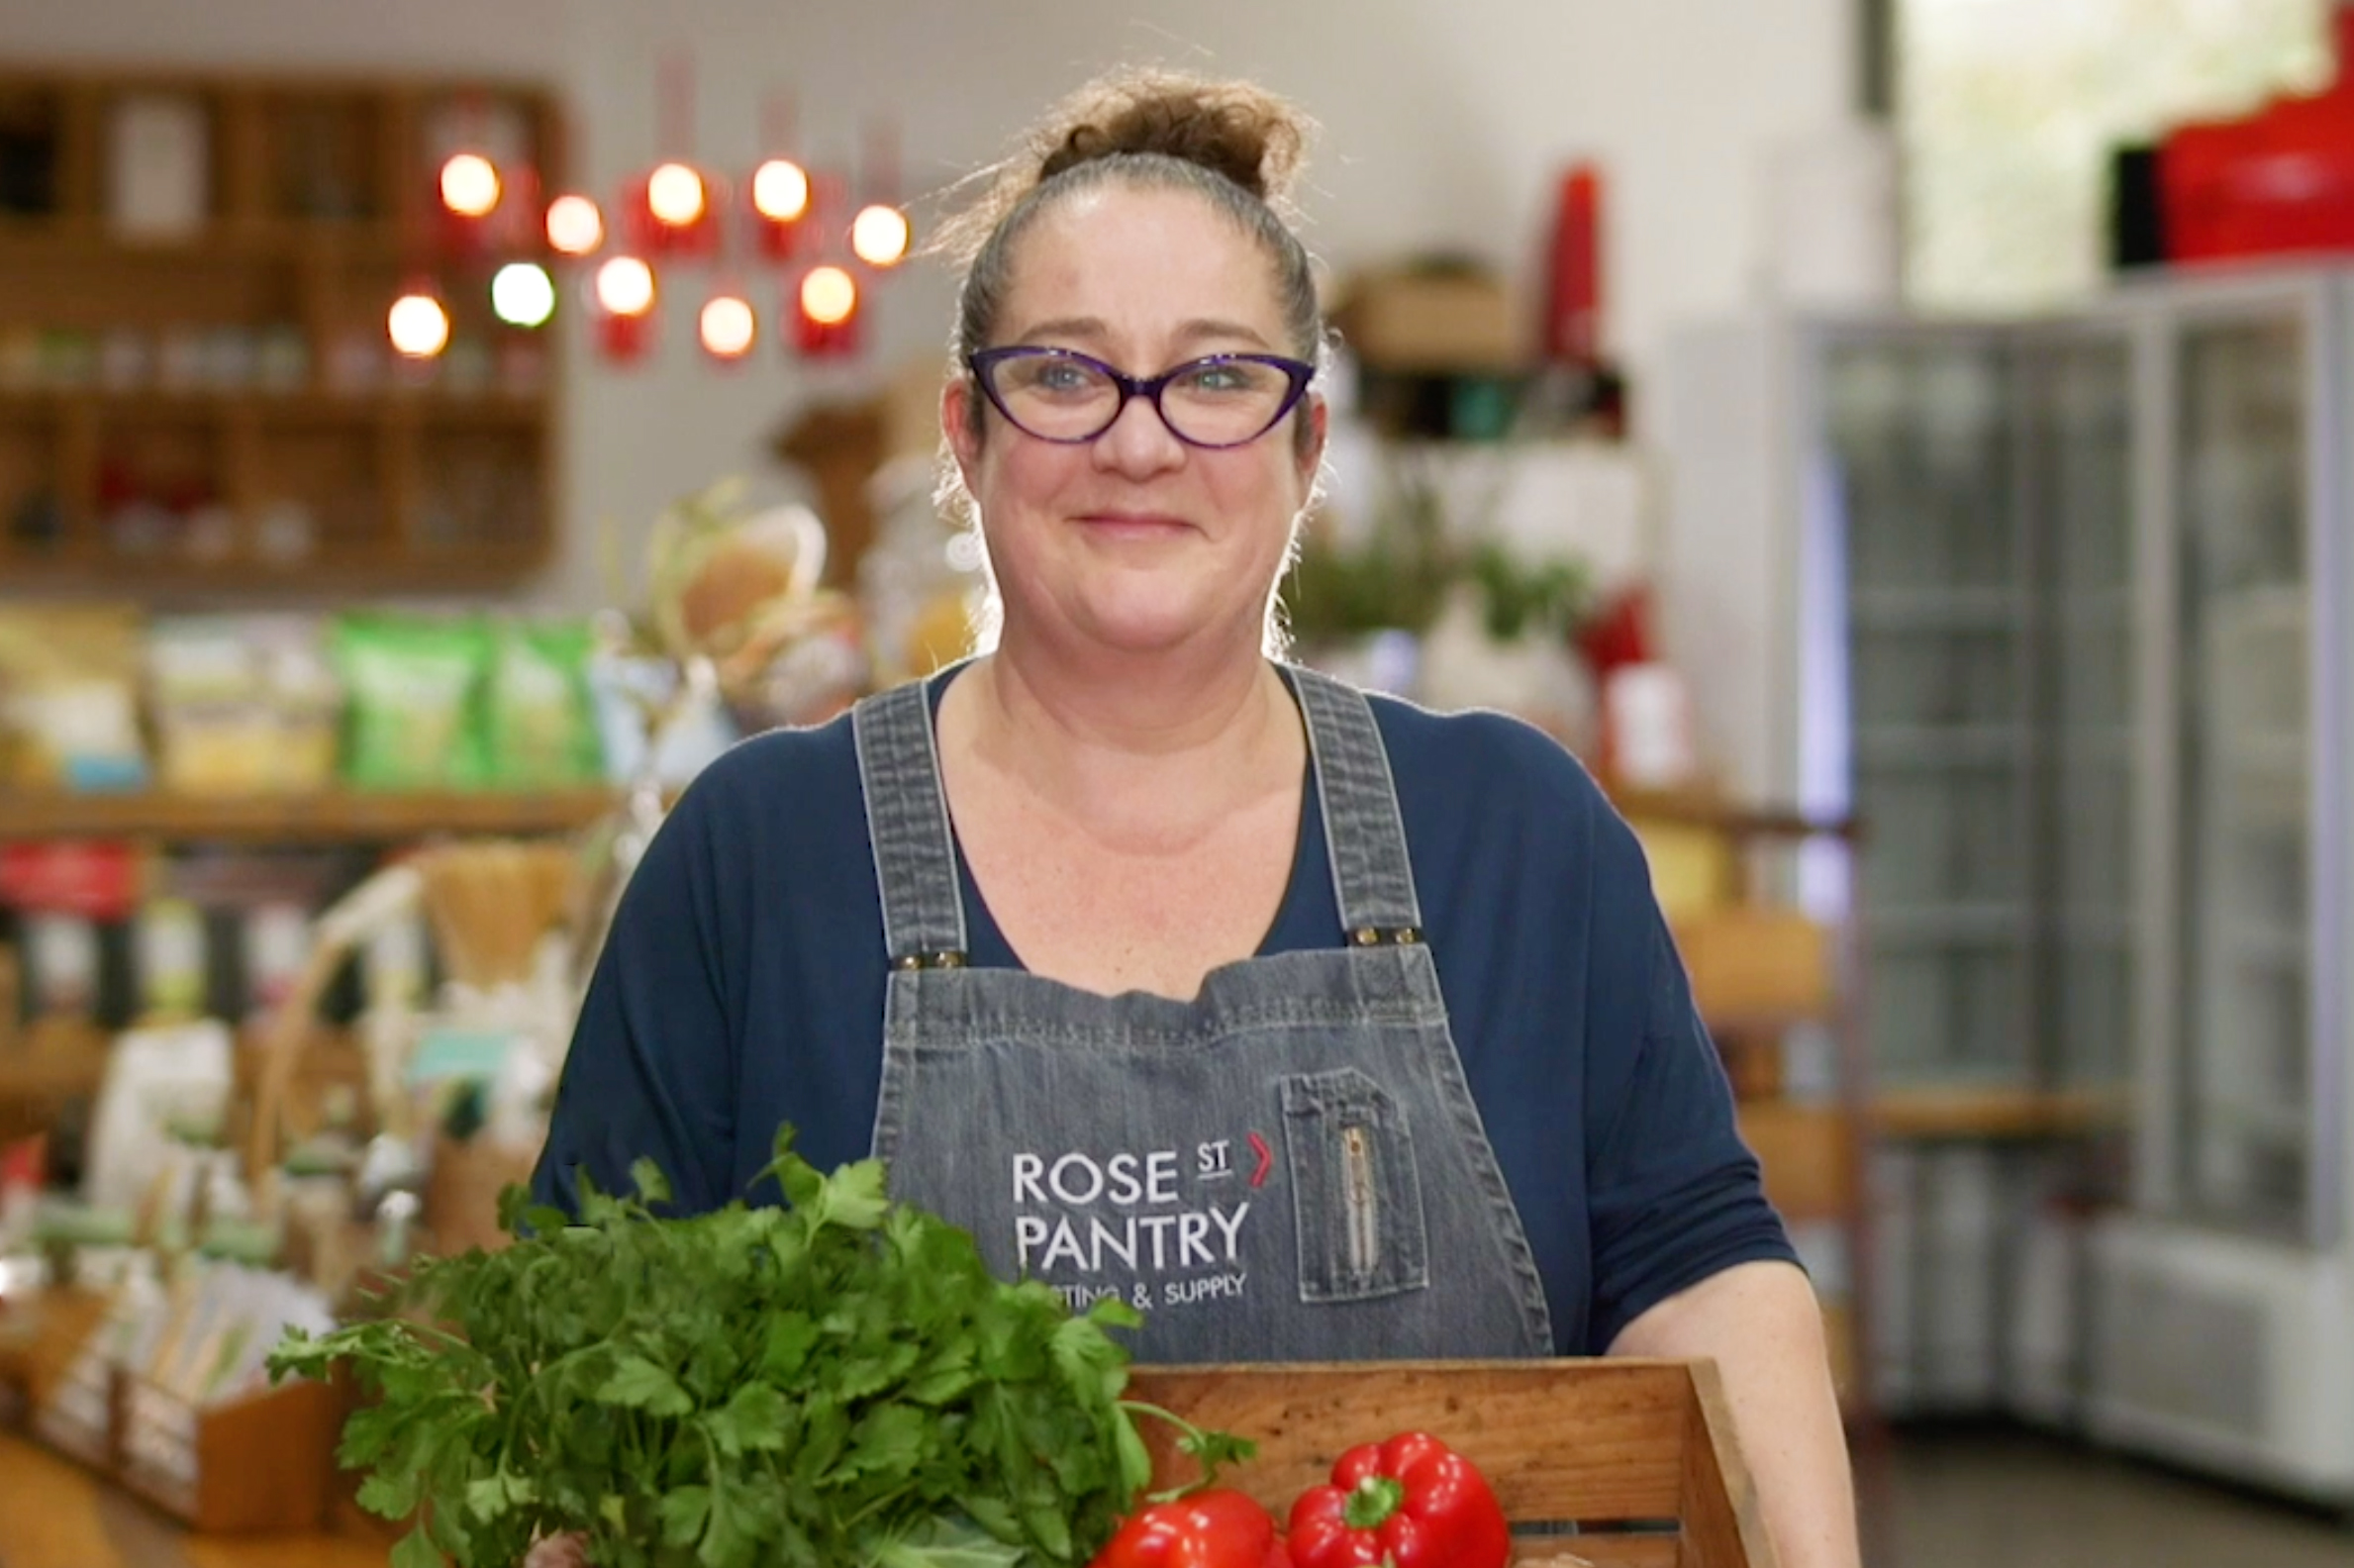 Meridith, owner of Rose St Pantry headshot